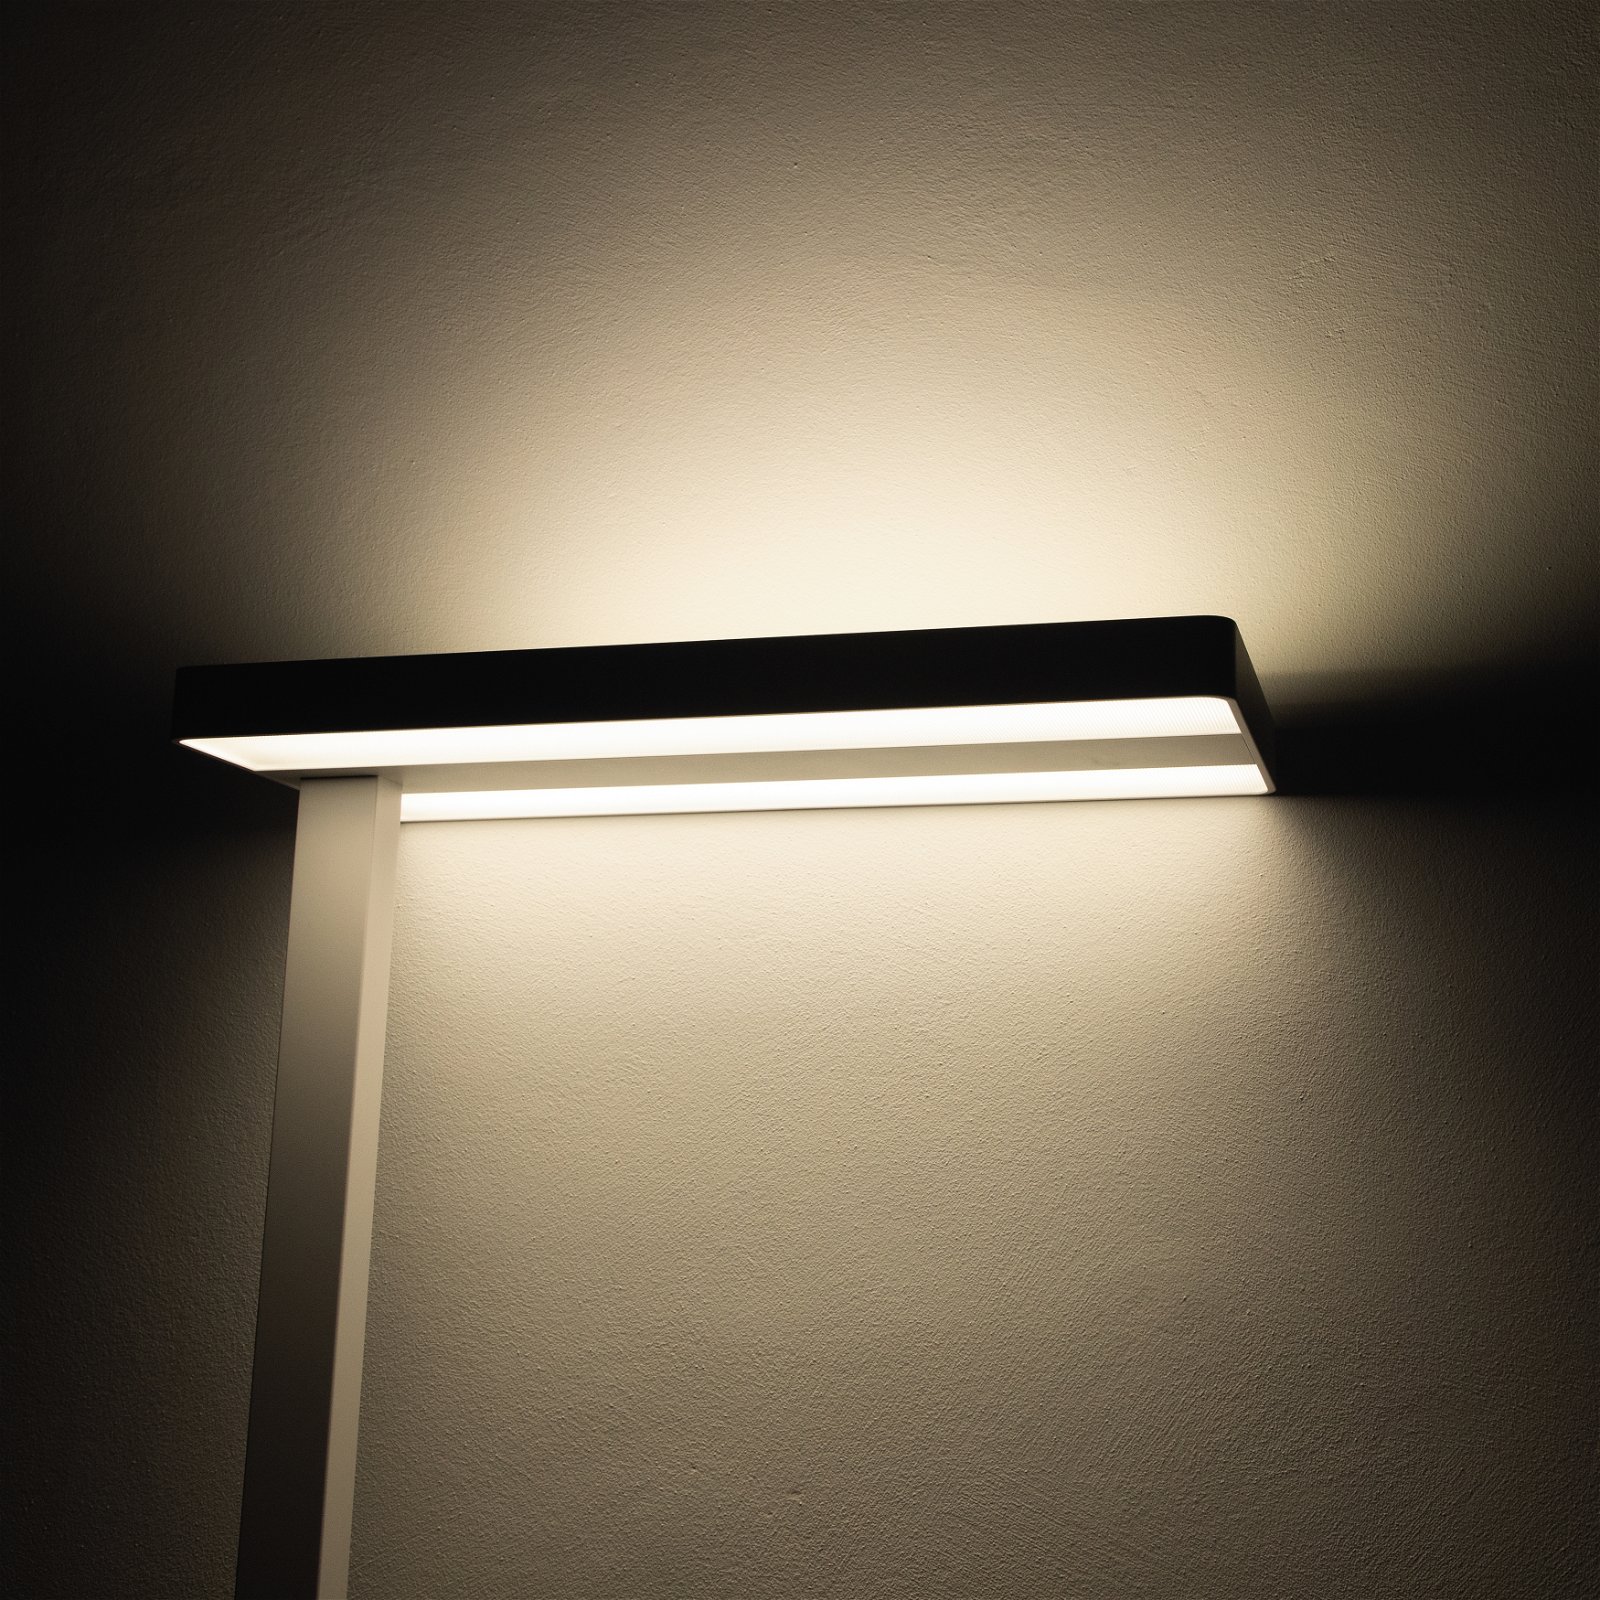 LED-Standleuchte MAULjaval, dimmbar